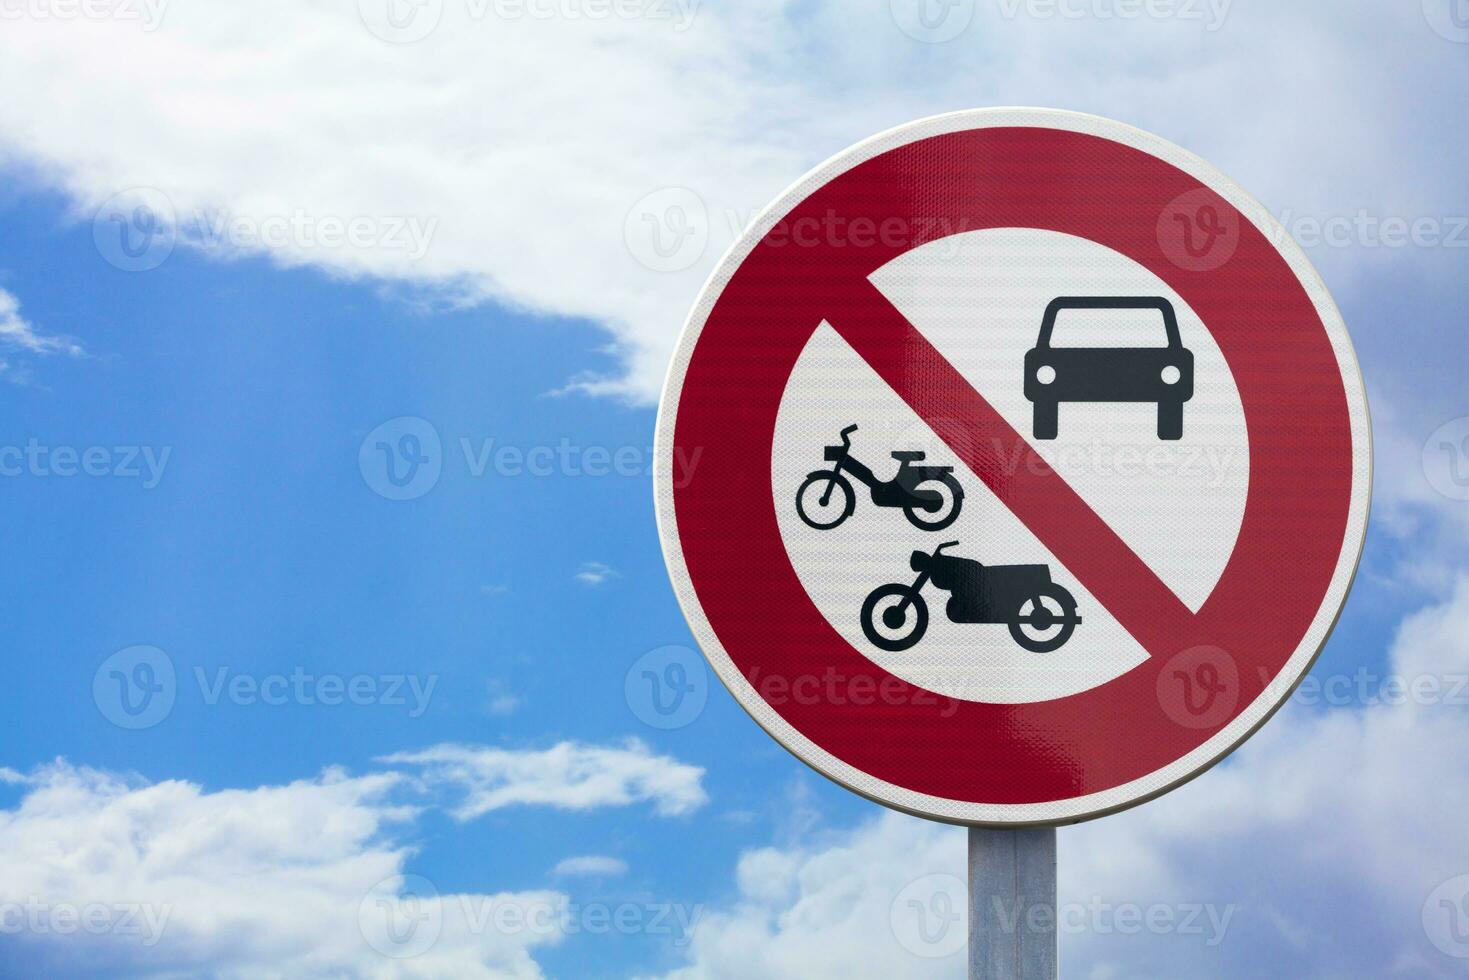 No entry sign for cars and motorcycles photo